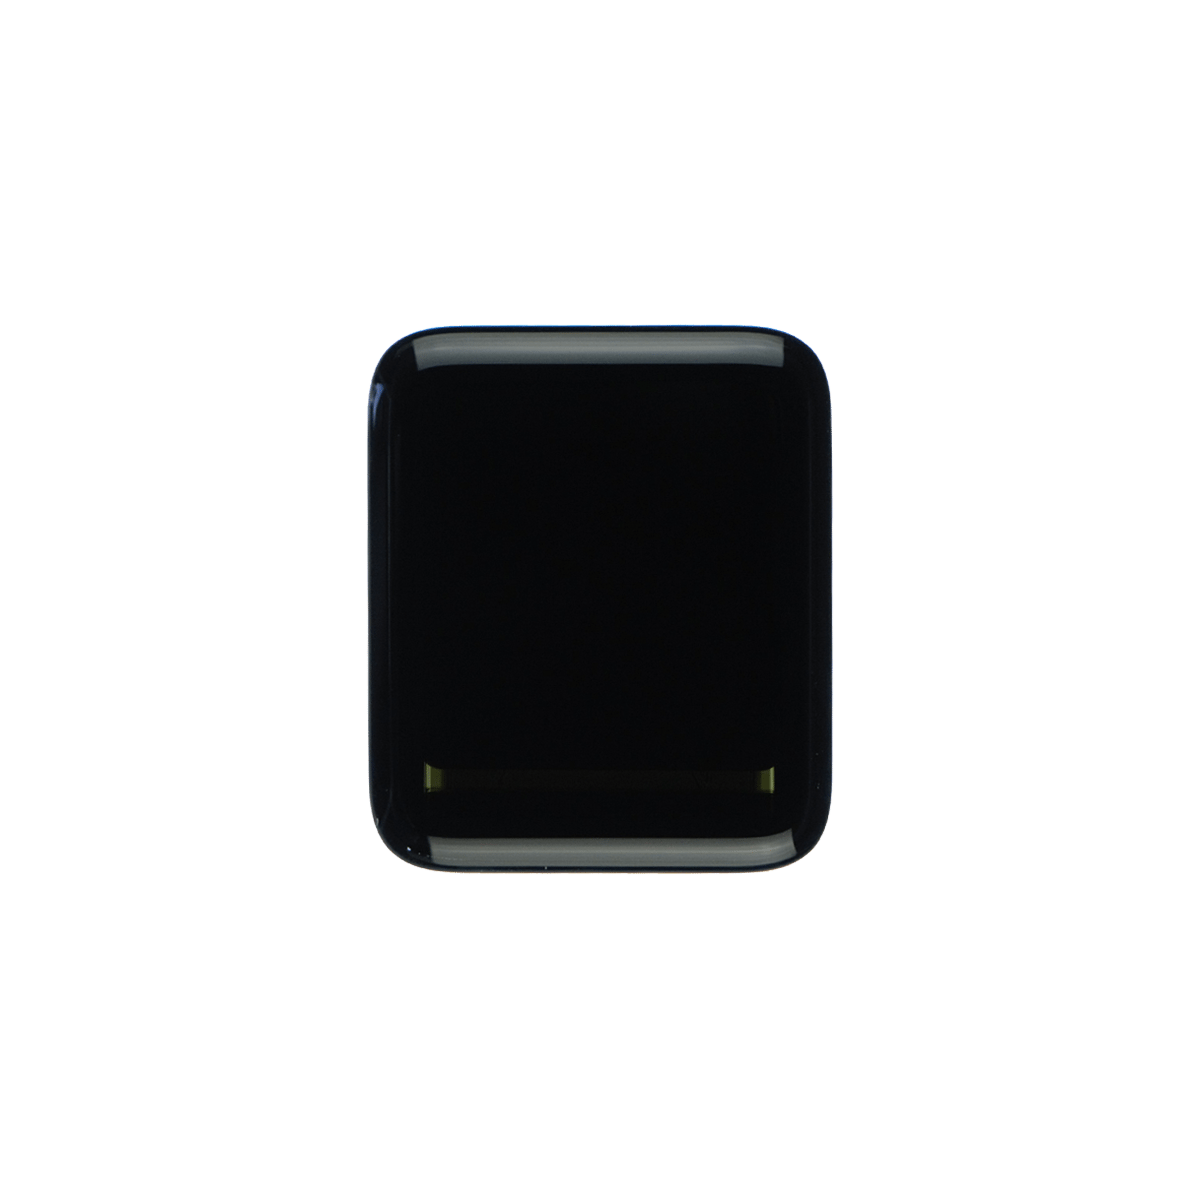 Apple Watch (Series 3 - 42 mm) Display Assembly GPS+Cellular